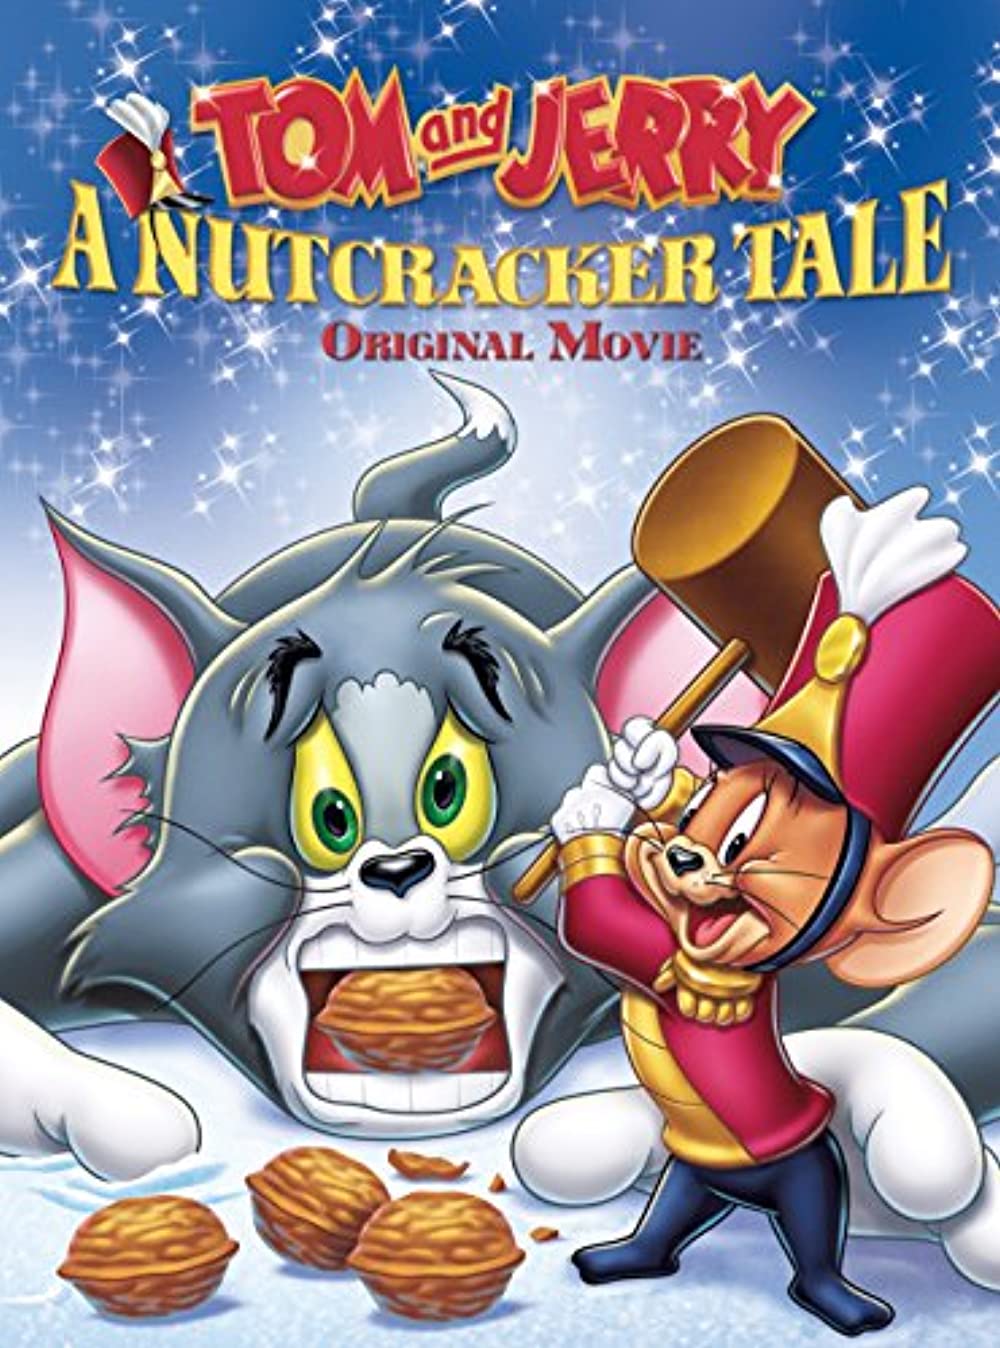 Download Tom and Jerry: A Nutcracker Tale Movie | Tom And Jerry: A Nutcracker Tale Review